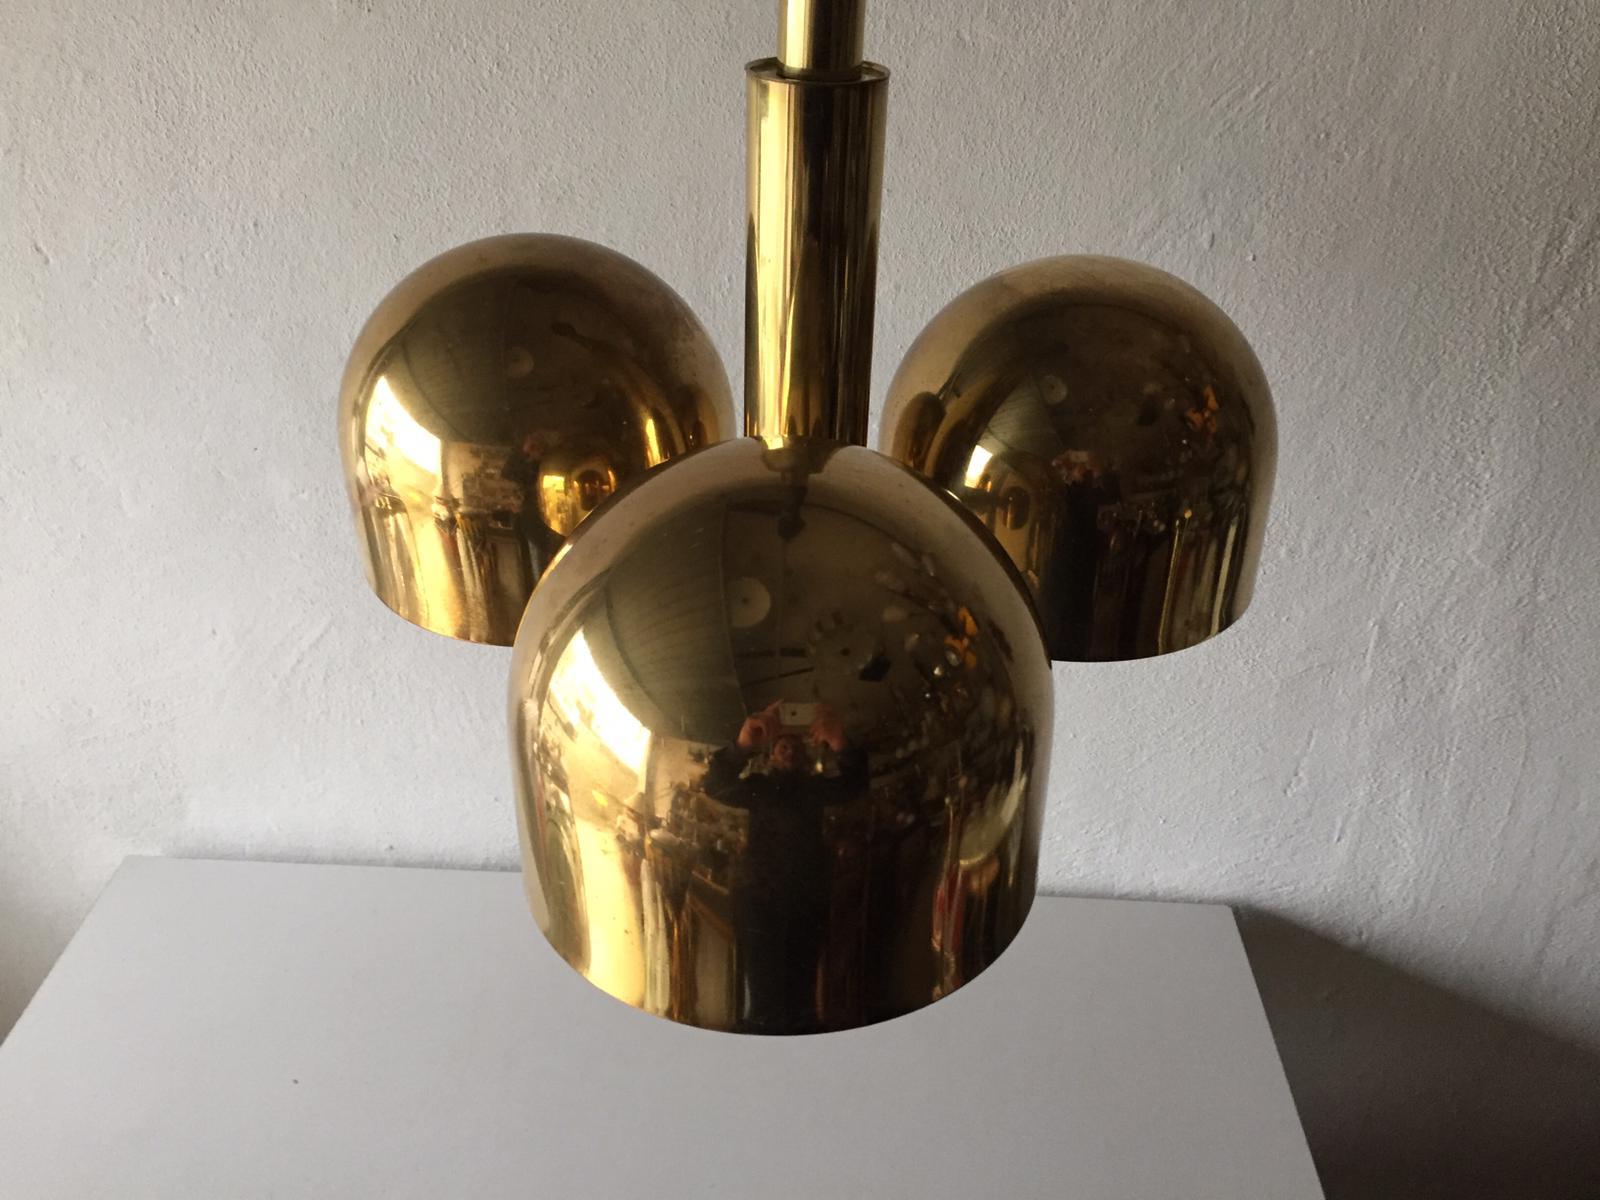 3 armed full brass body chandelier with adjustable hanging rope by Hillebrand, 1970s Germany

Unusual and rare design. 

Lampshade is in good condition and clean. 

This lamp works with 3 x E27 light bulbs. Max 100W
Wired and suitable to use